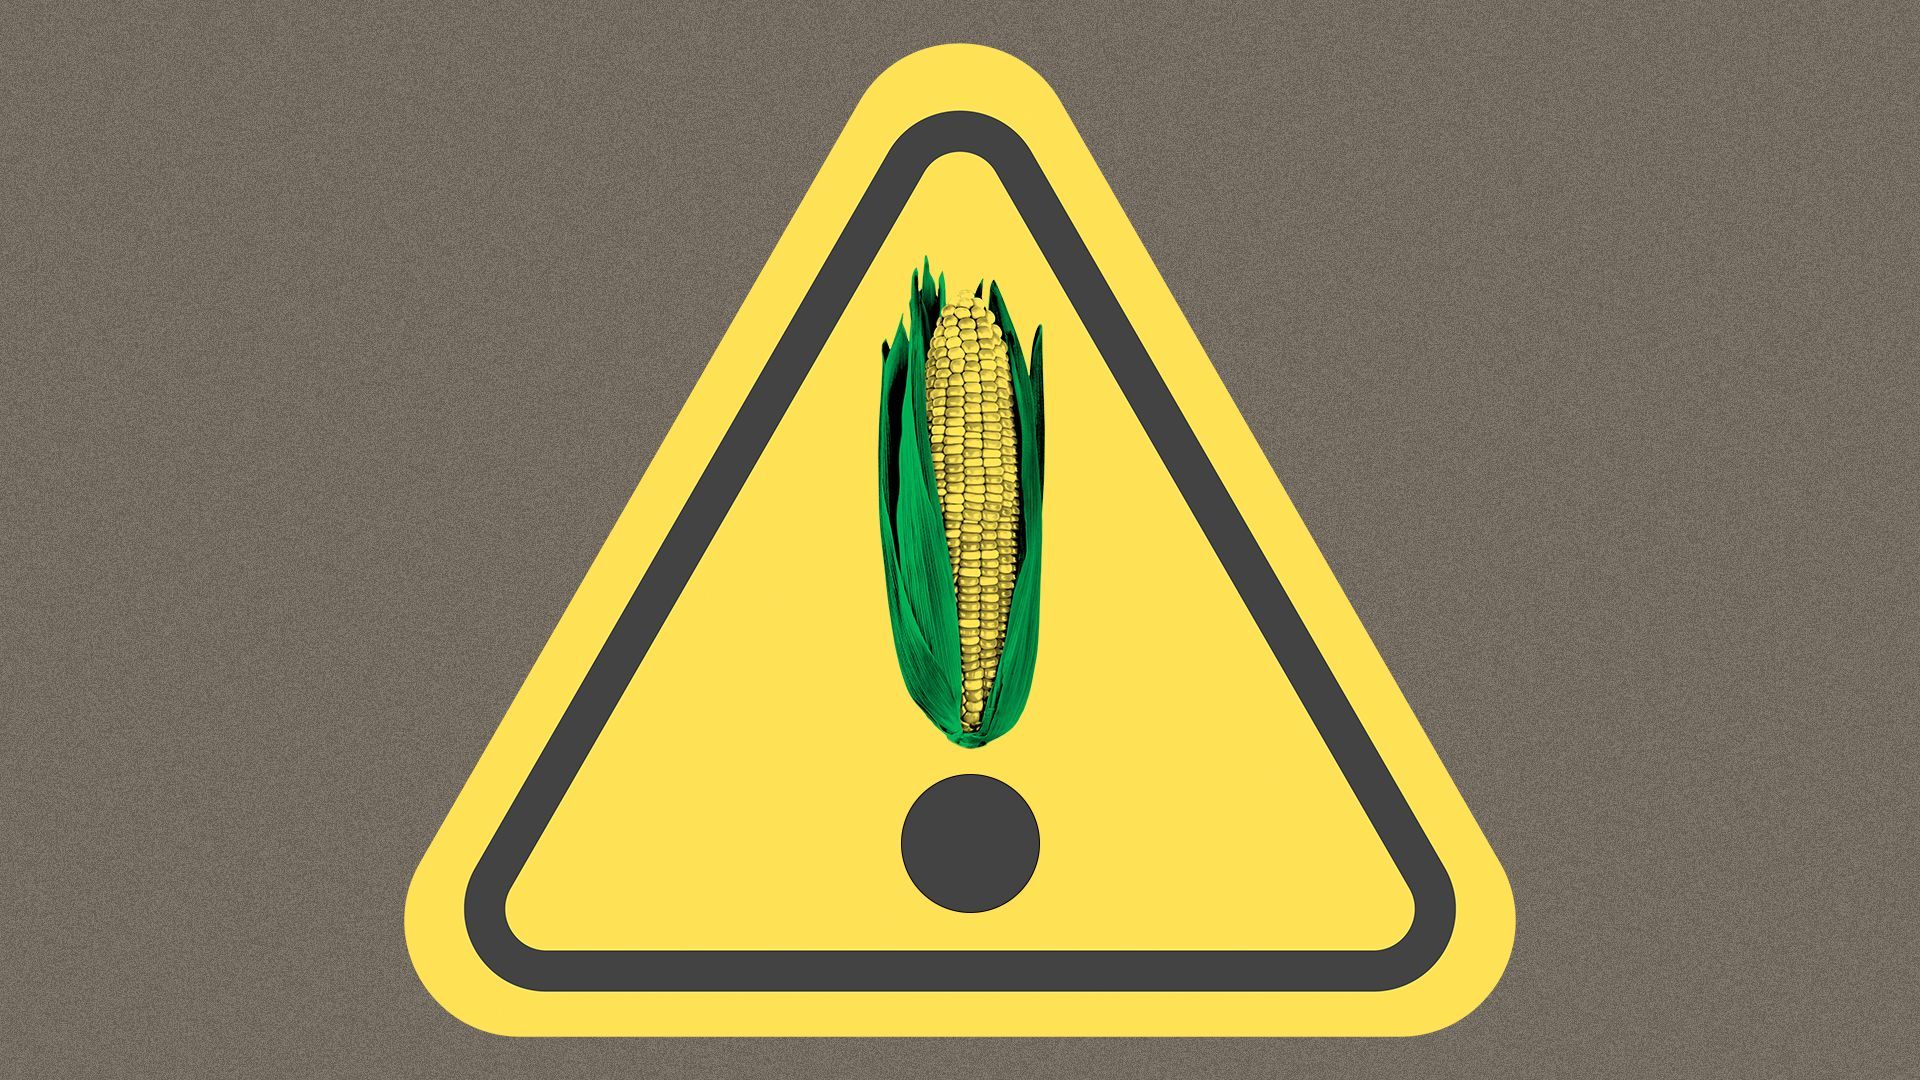 Illustration of a danger sign with an ear of corn for an exclamation point.